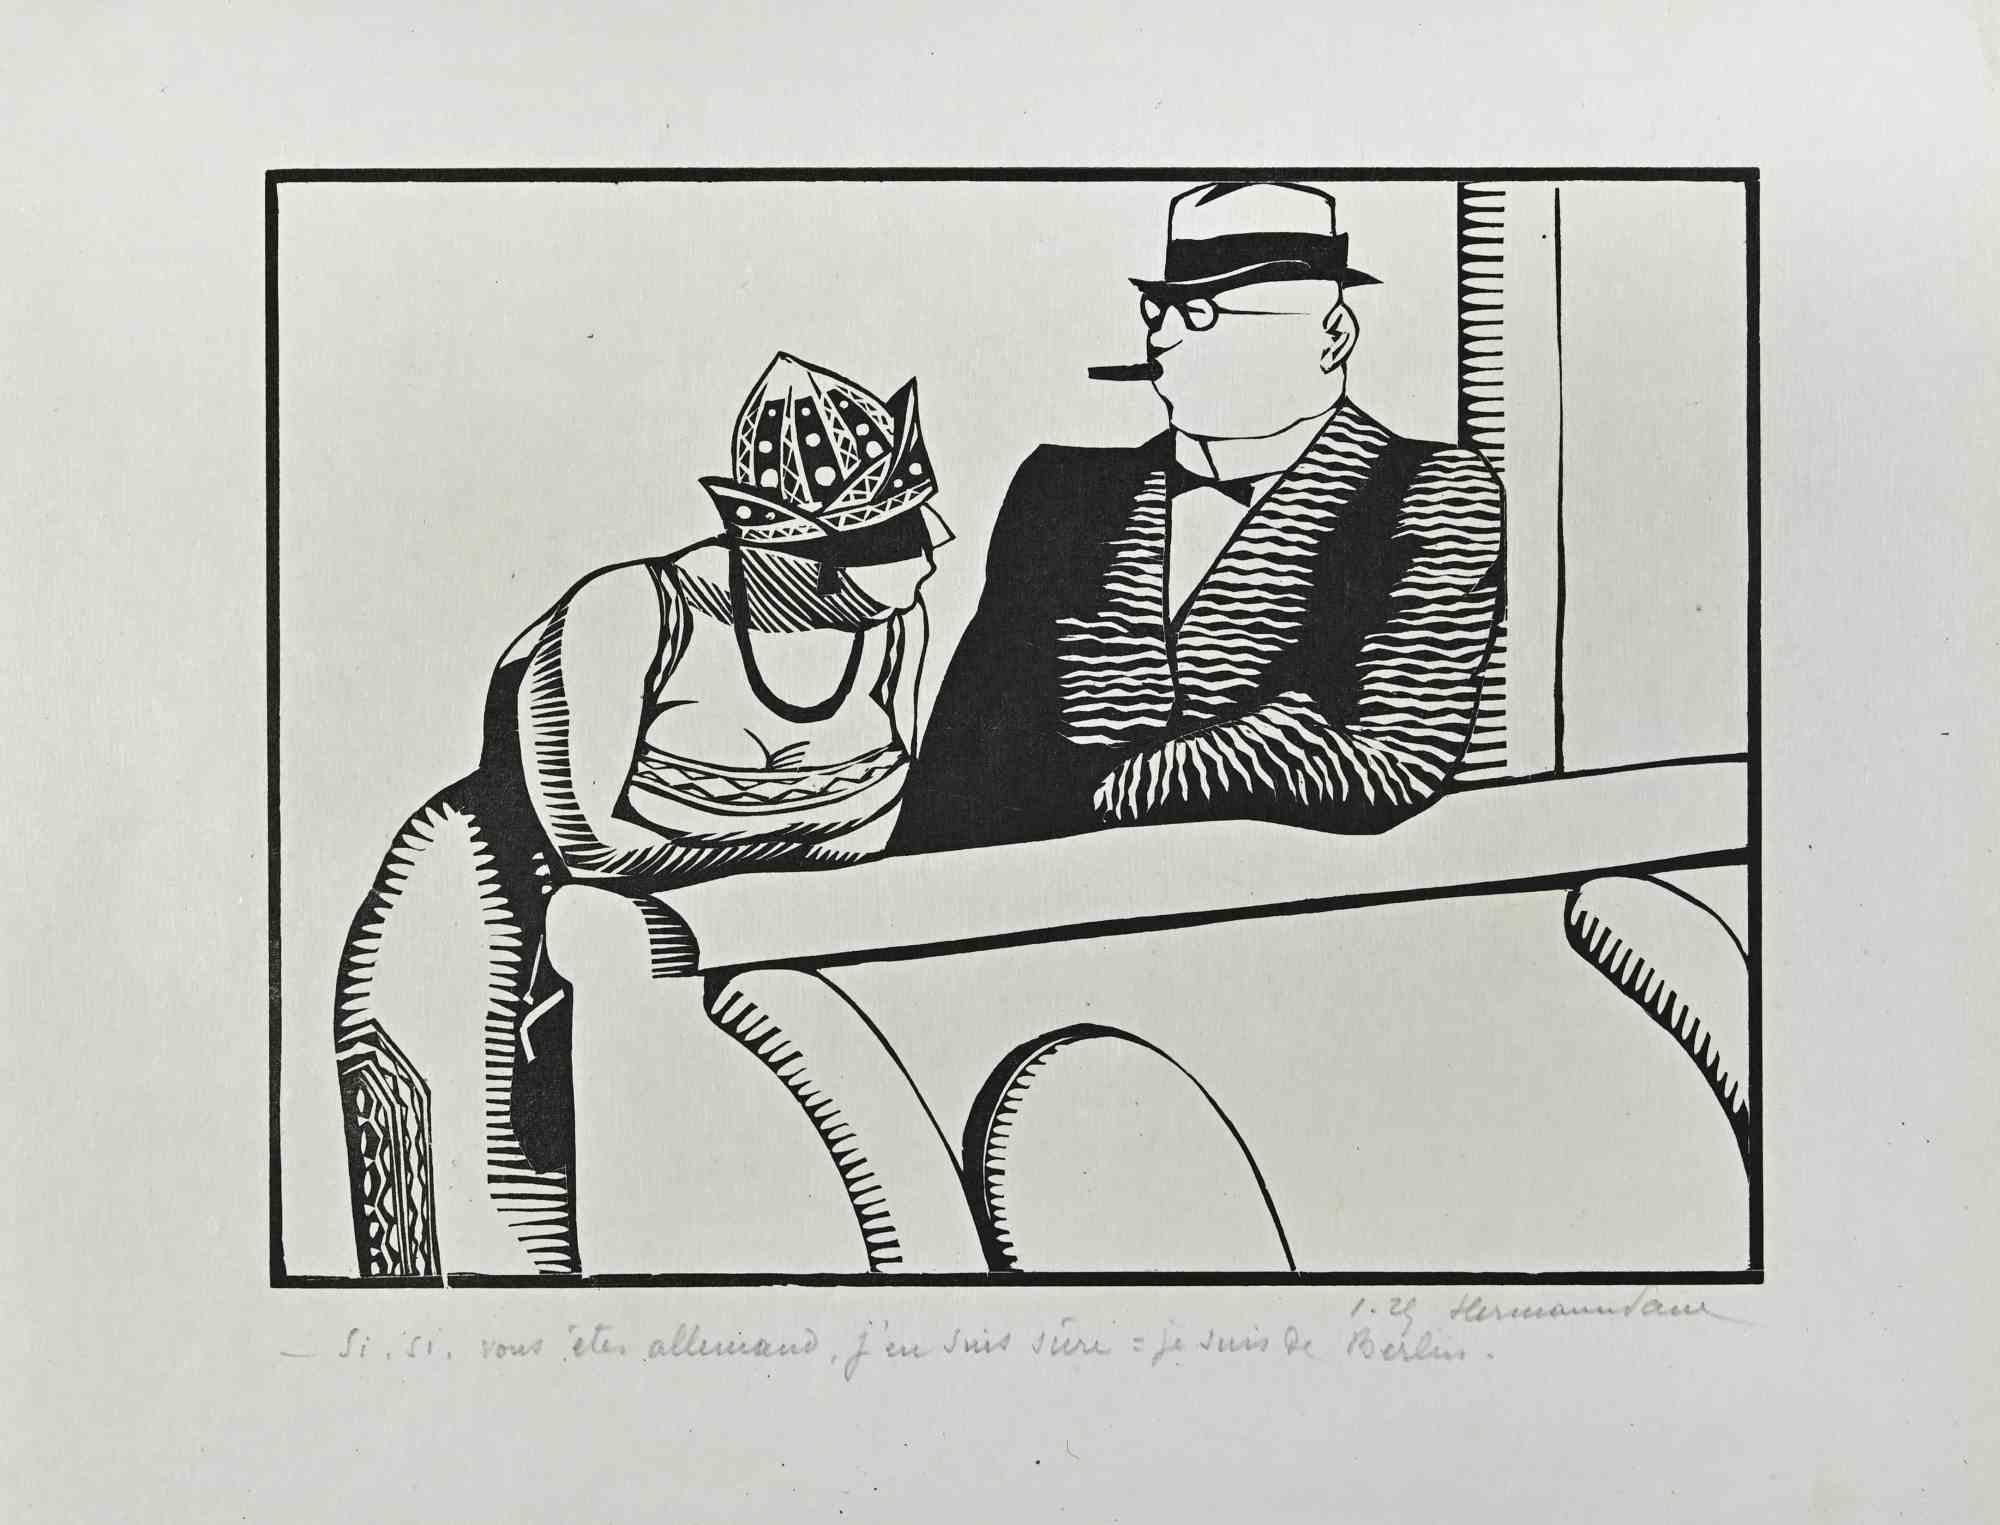 The Conversation is an Original China Ink Drawing realized by Hermann Paul (1864-1940).

Good condition on a white paper. 

Hand-signed and titled on the lower margin.

Hermann René Georges. (Paris 1864 - Les Saintes- Marie-de-la-Mer 1940). A highly